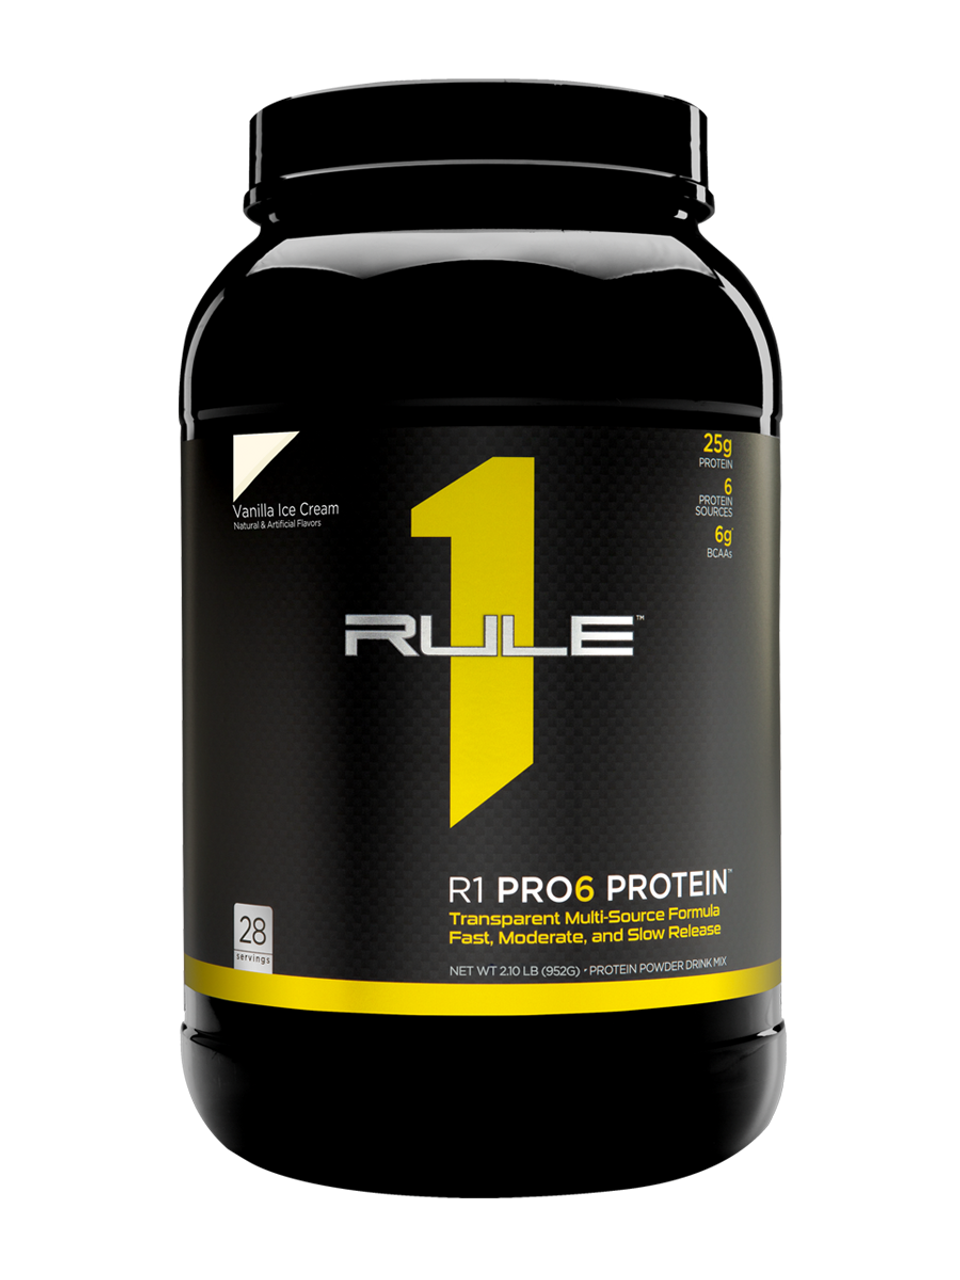 R1 PRO6 PROTEIN
TRANSPARENT MULTI-SOURCE FORMULA
25g multi-source protein^^
Faster, moderate, slower release
Full protein transparency
Whey isolate, hydrolysate isolate & native isolate
Micellar casein & egg white proteins
Over 12g EAA including 6g BCAAs^^
Use around workouts, between meals, or as a protein snack
Carefully blended and packaged in a GMP facility in the USA